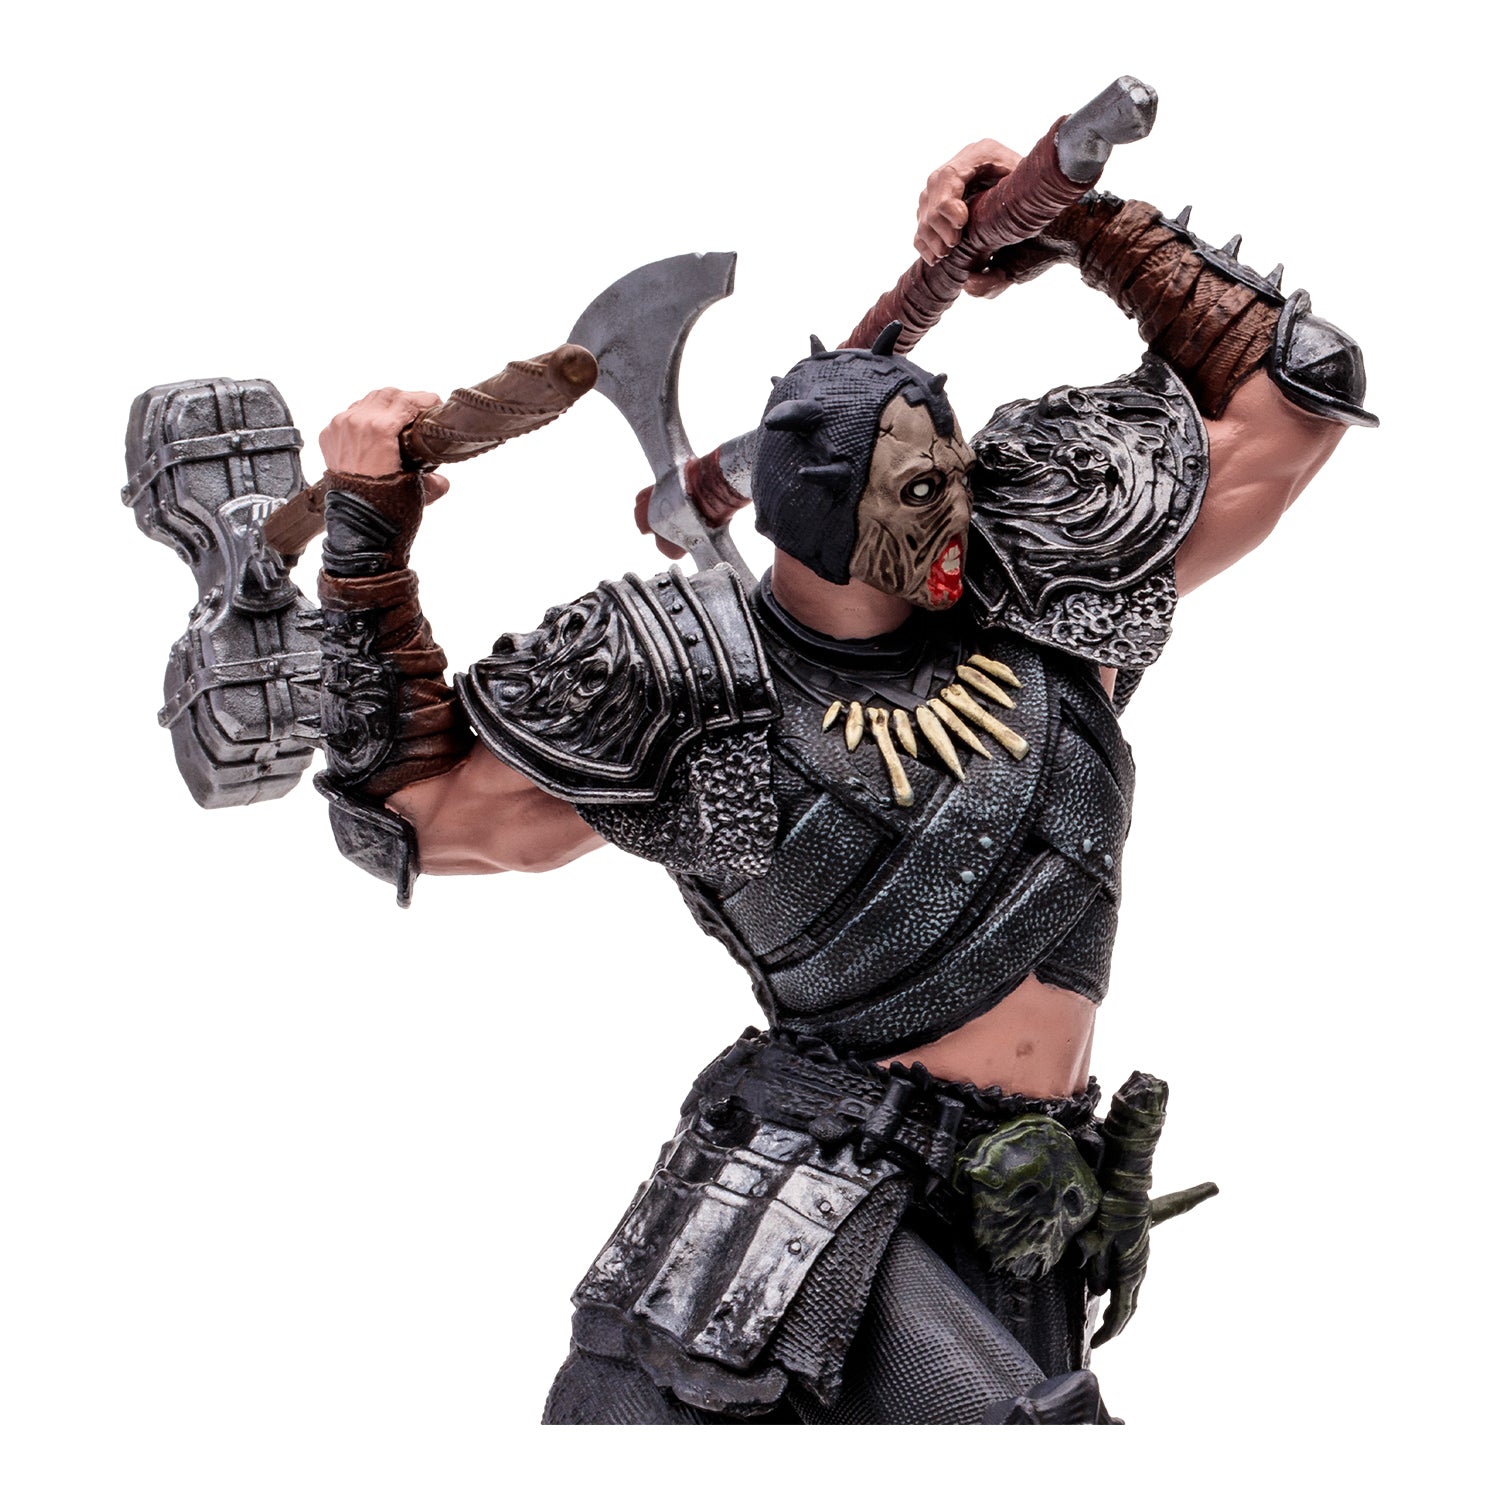 Diablo IV Common Death Blow Barbarian 7 in Action Figure - Close Up View